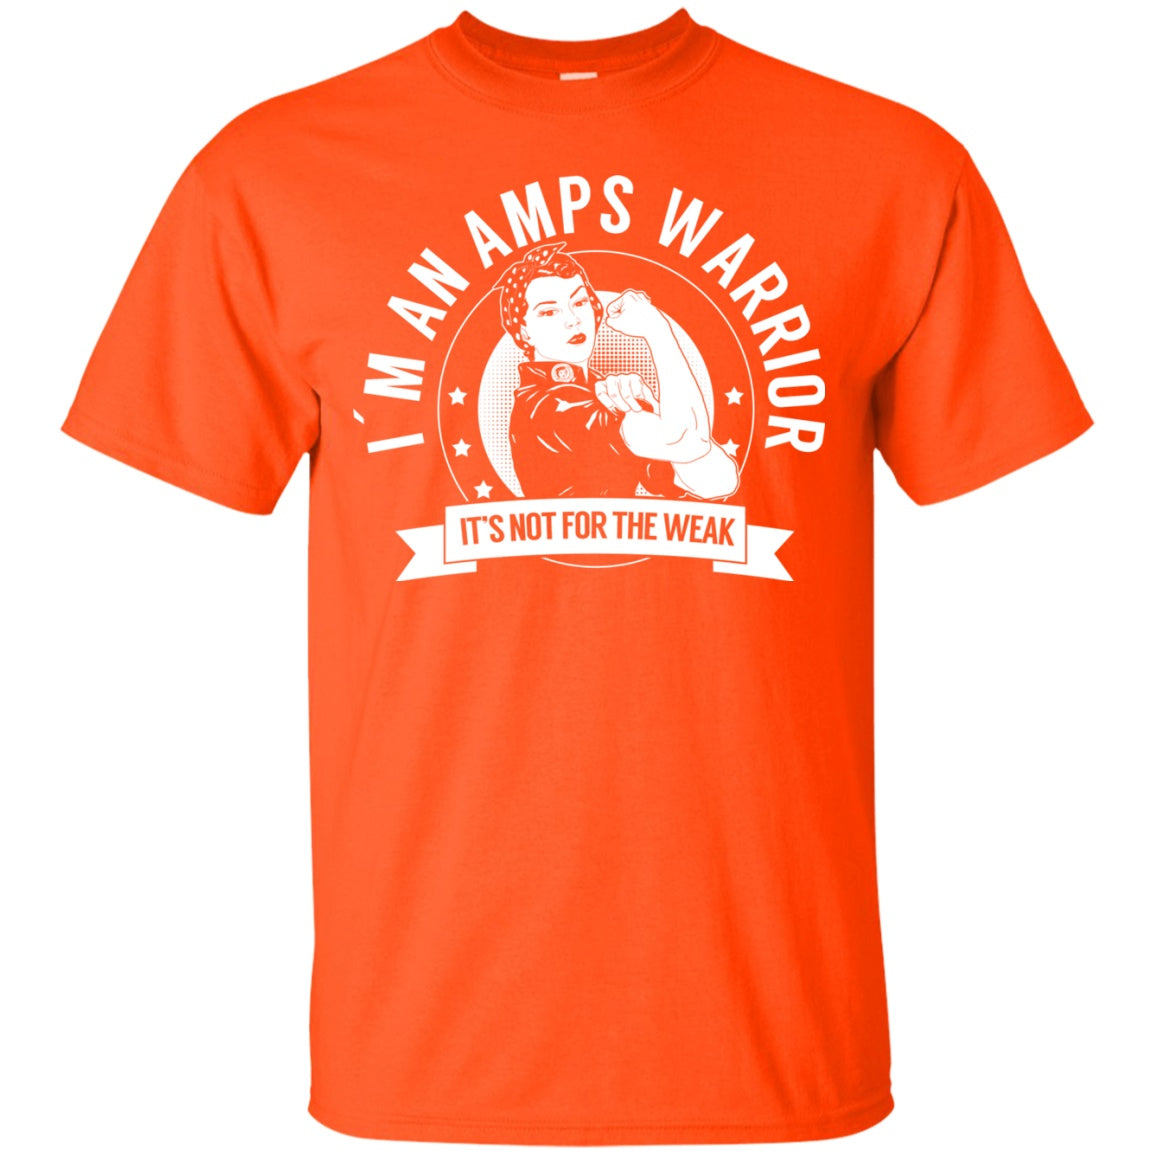 Amplified Musculoskeletal Pain Syndrome - AMPS Warrior NFTW Unisex Shirt - The Unchargeables